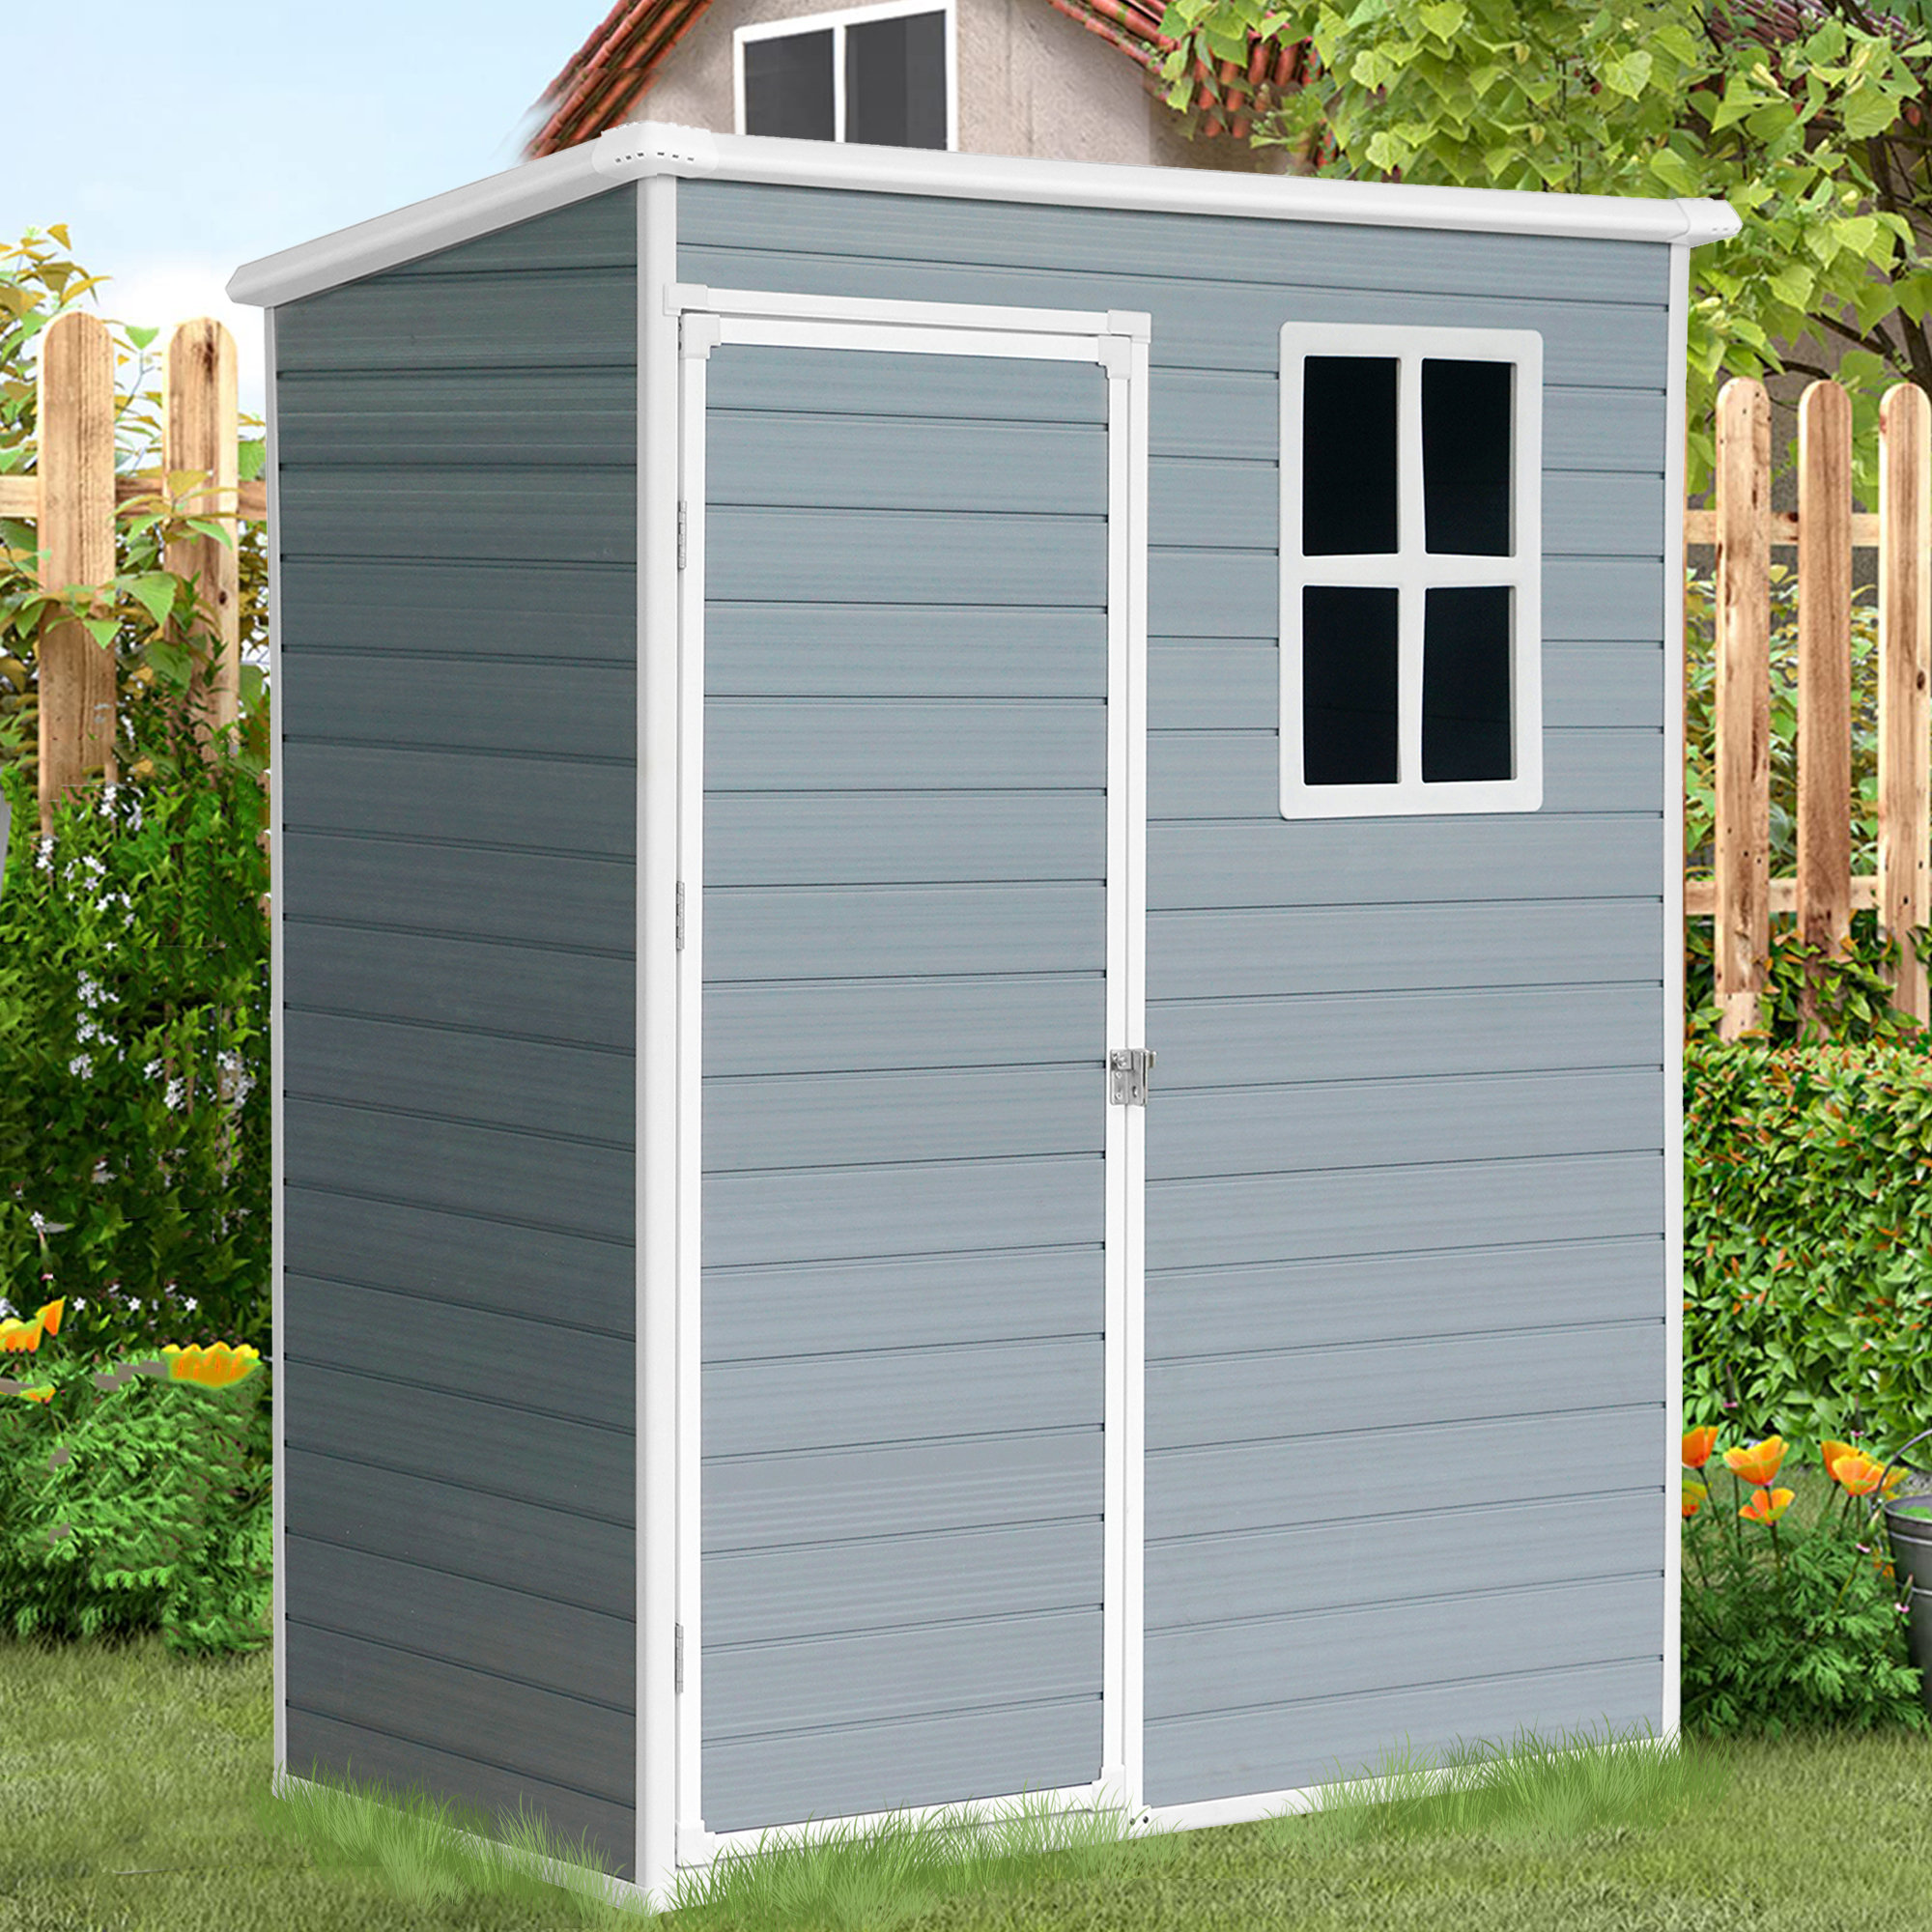 iYofe Outdoor Storage Shed 5x3 FT, Garden Shed for Bike, Tool, Plastic Outside  Sheds Lockable Door